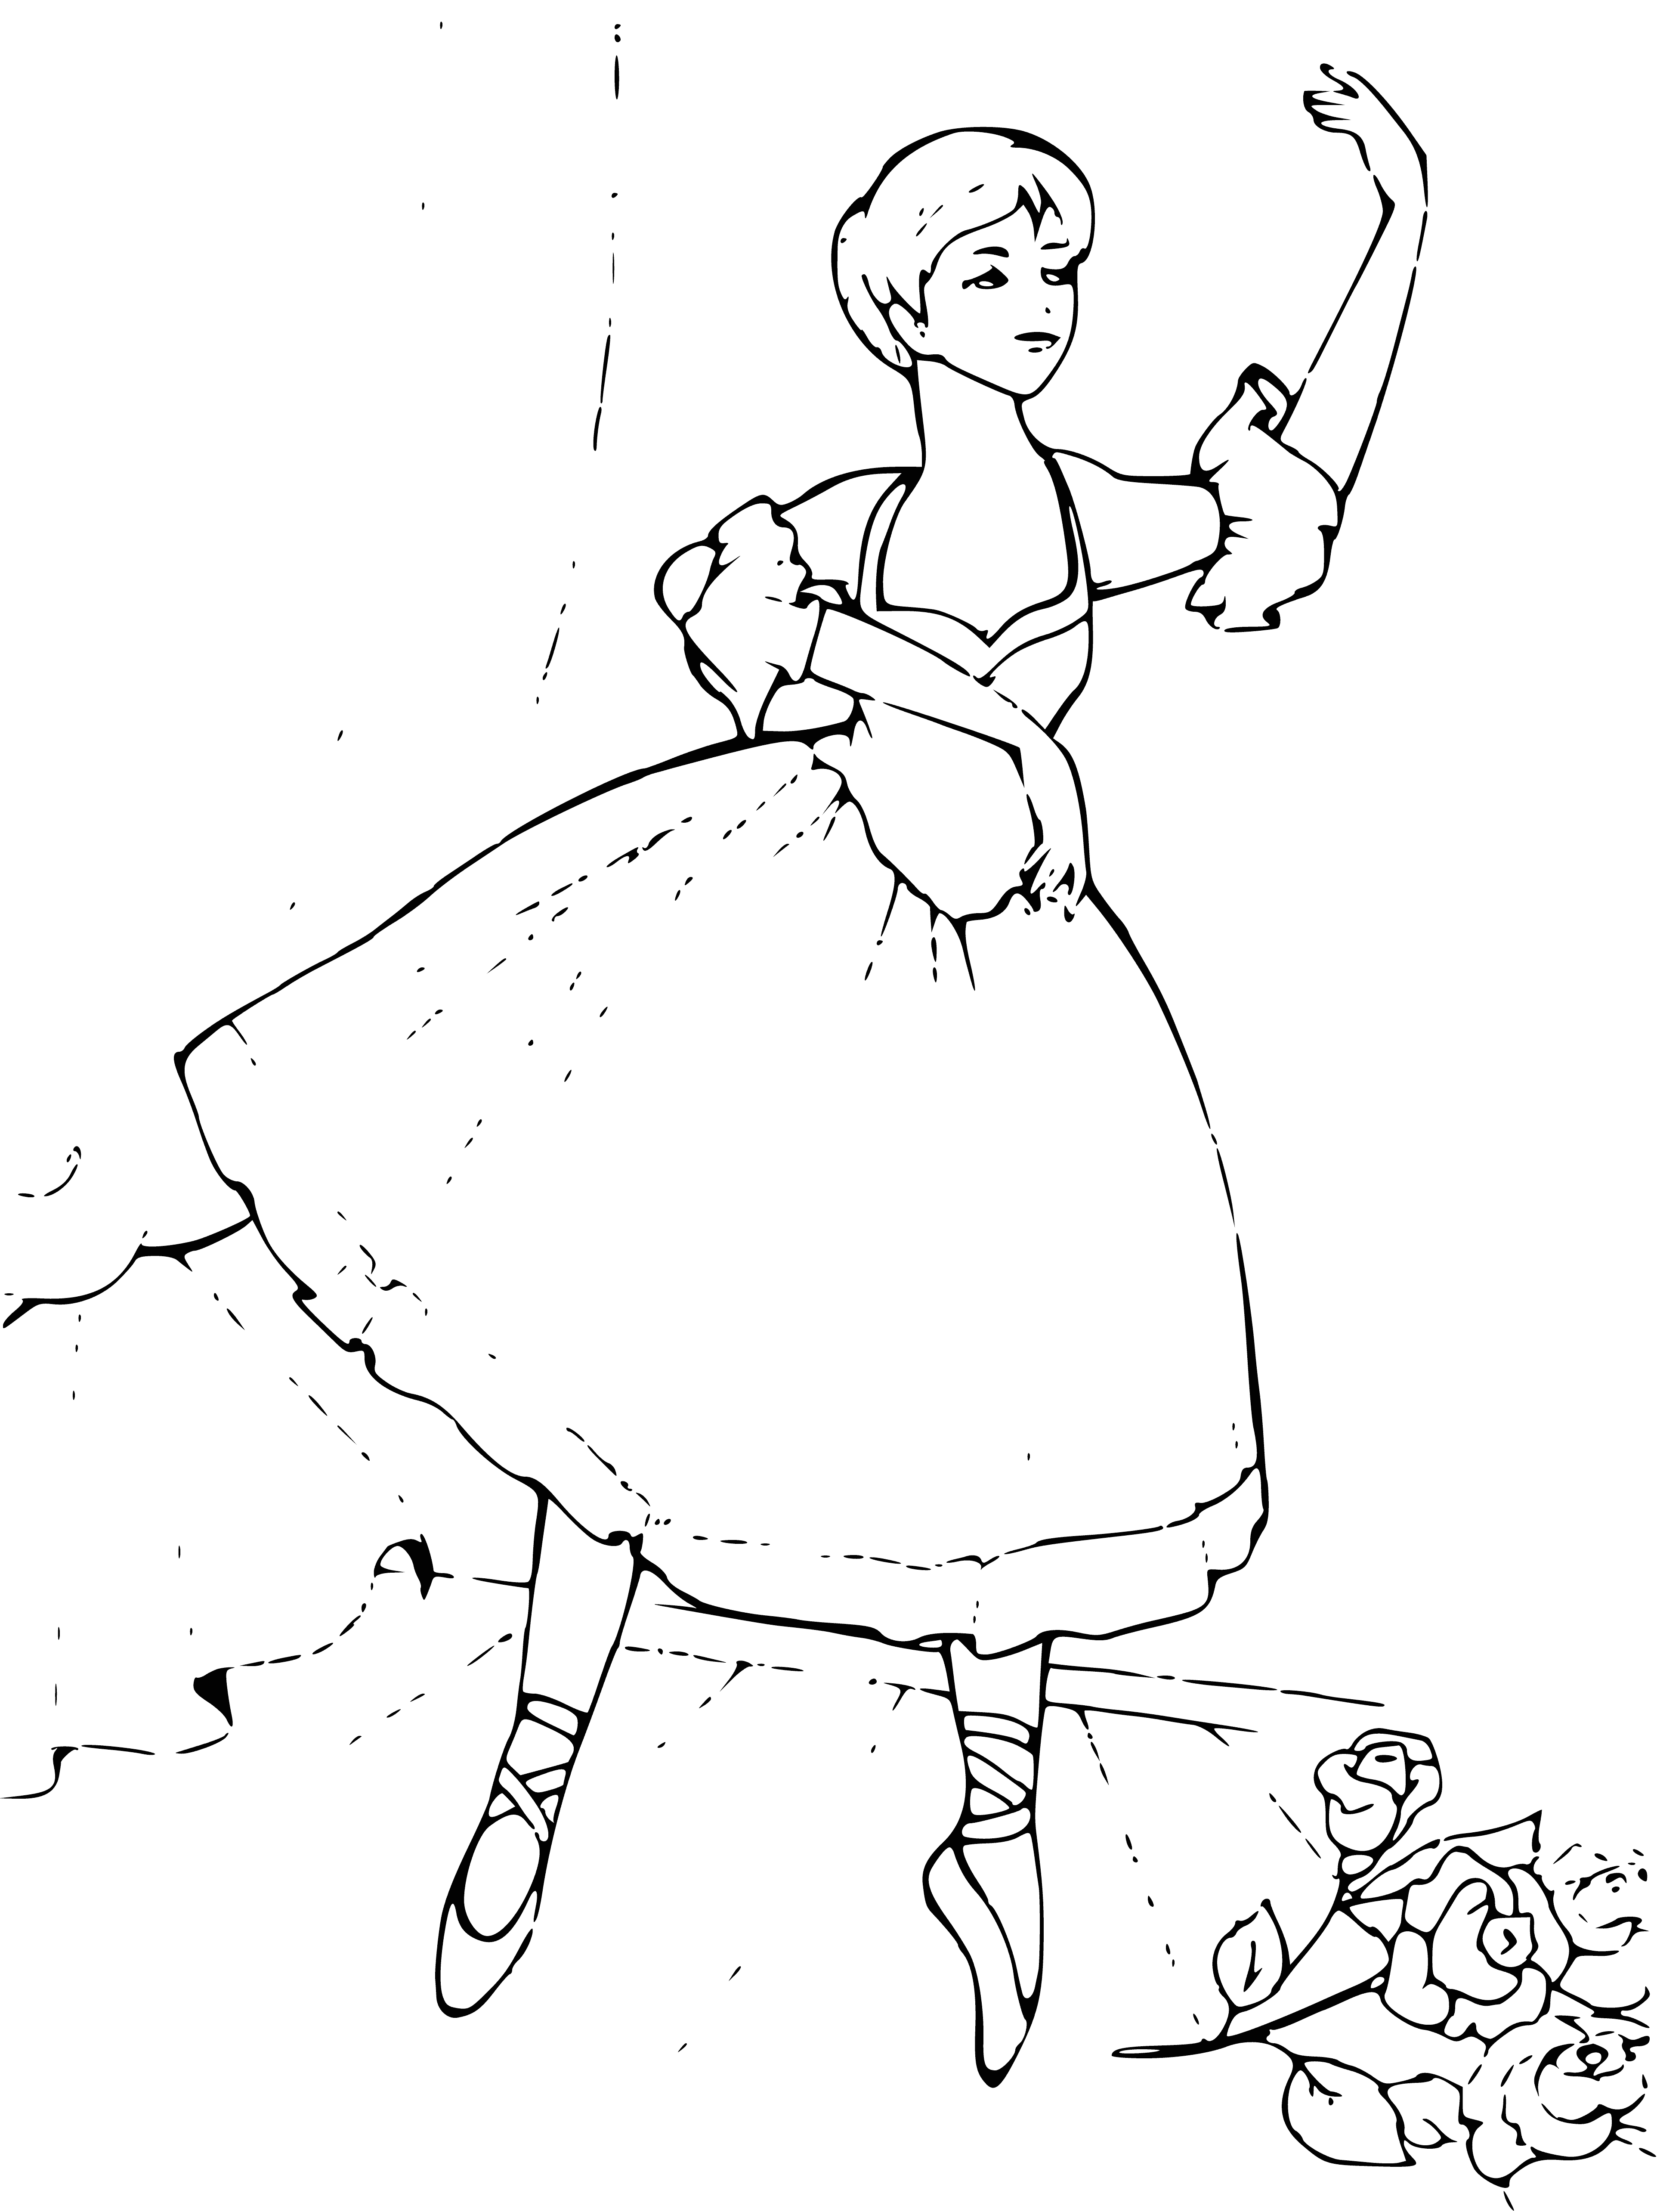 coloring page: A ballerina stands on pointe in a pale pink tutu, hair pulled back, arm raised, with a serious expression.